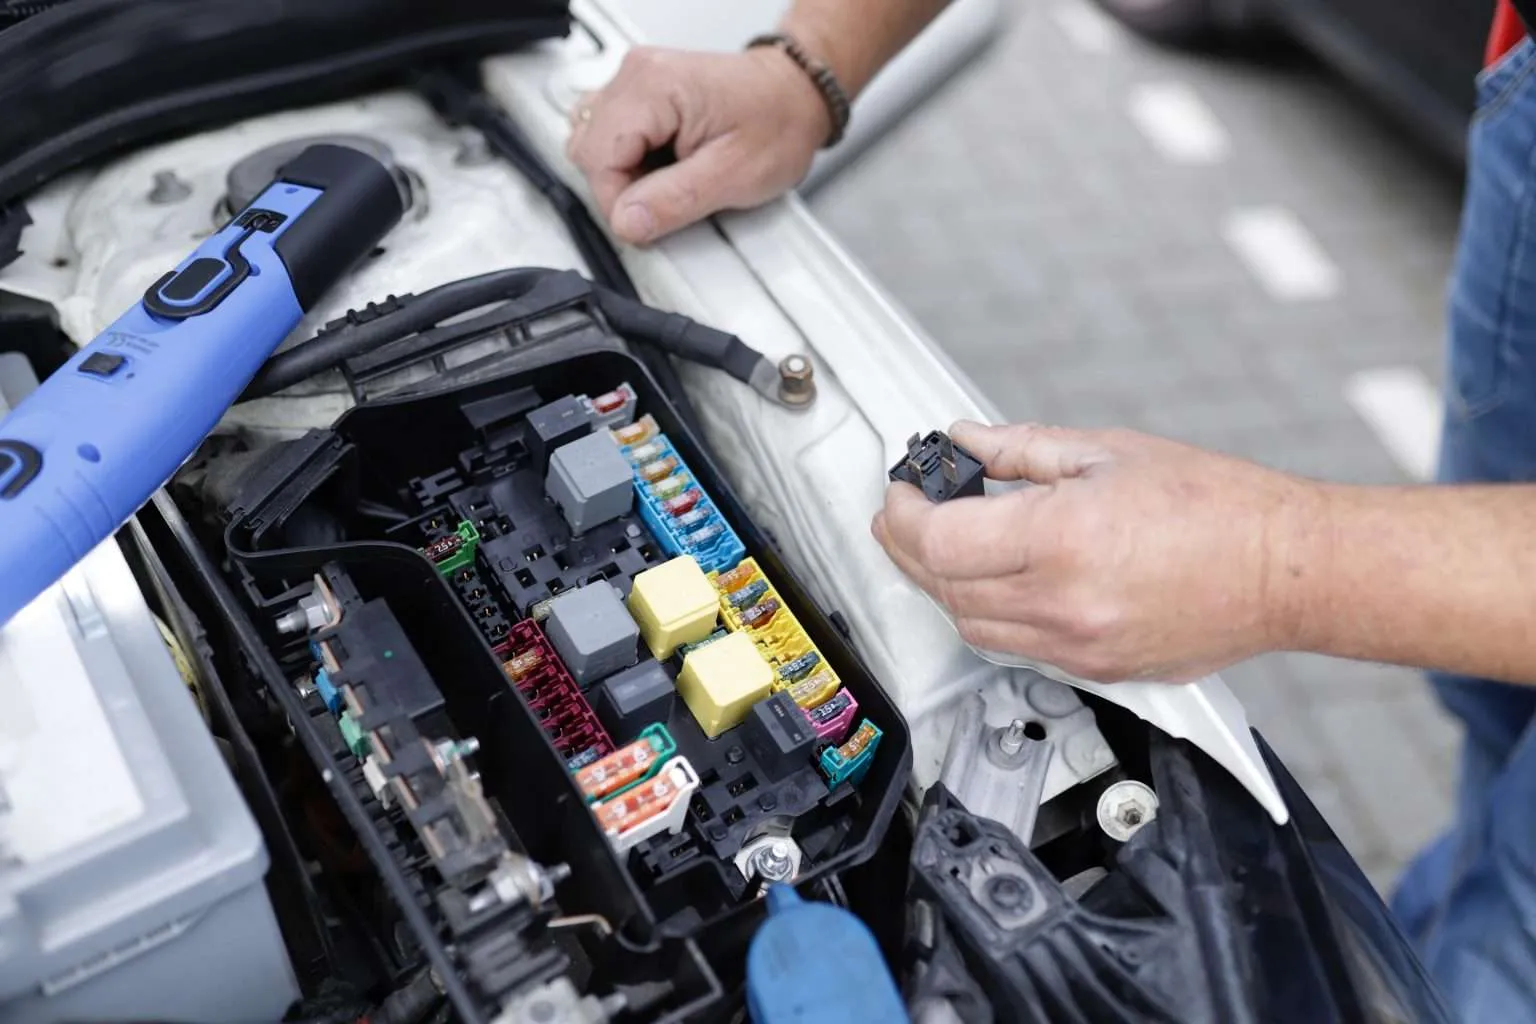 Navigating the Spark of Innovation Electrical Automotive Repair